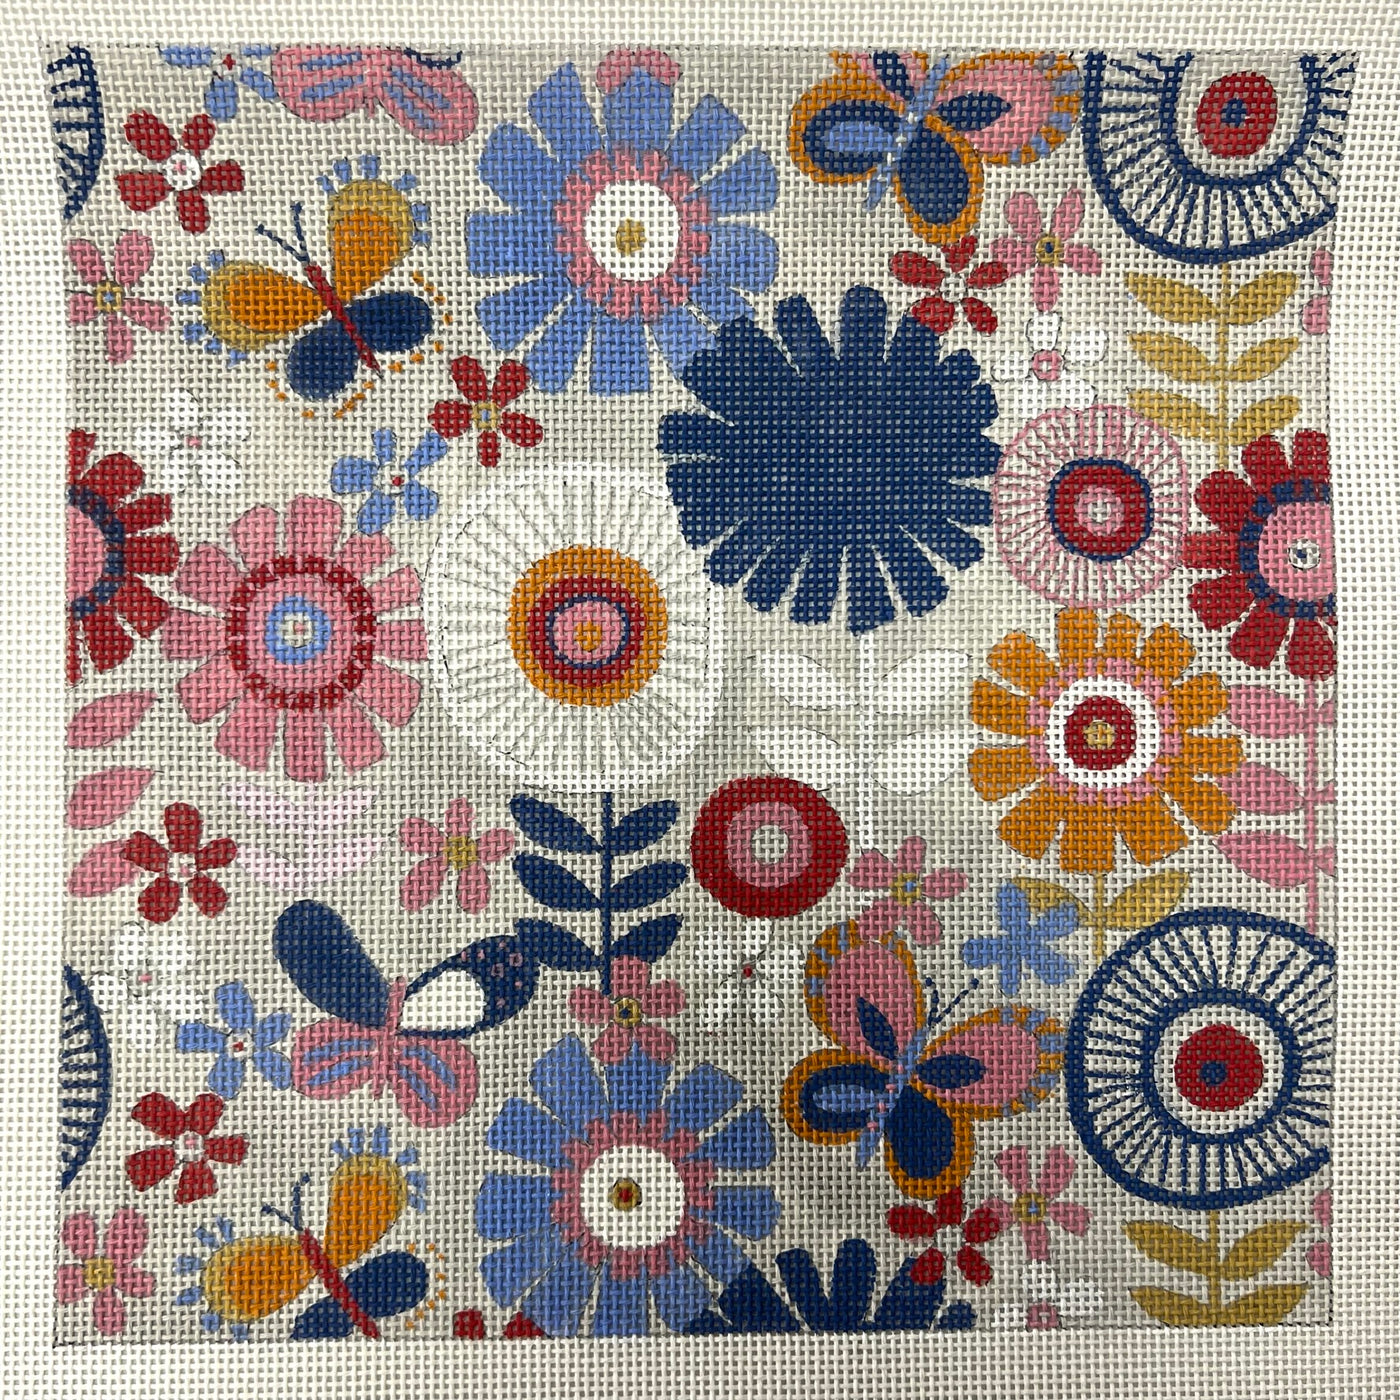 Flowers and Butterflies Needlepoint Canvas